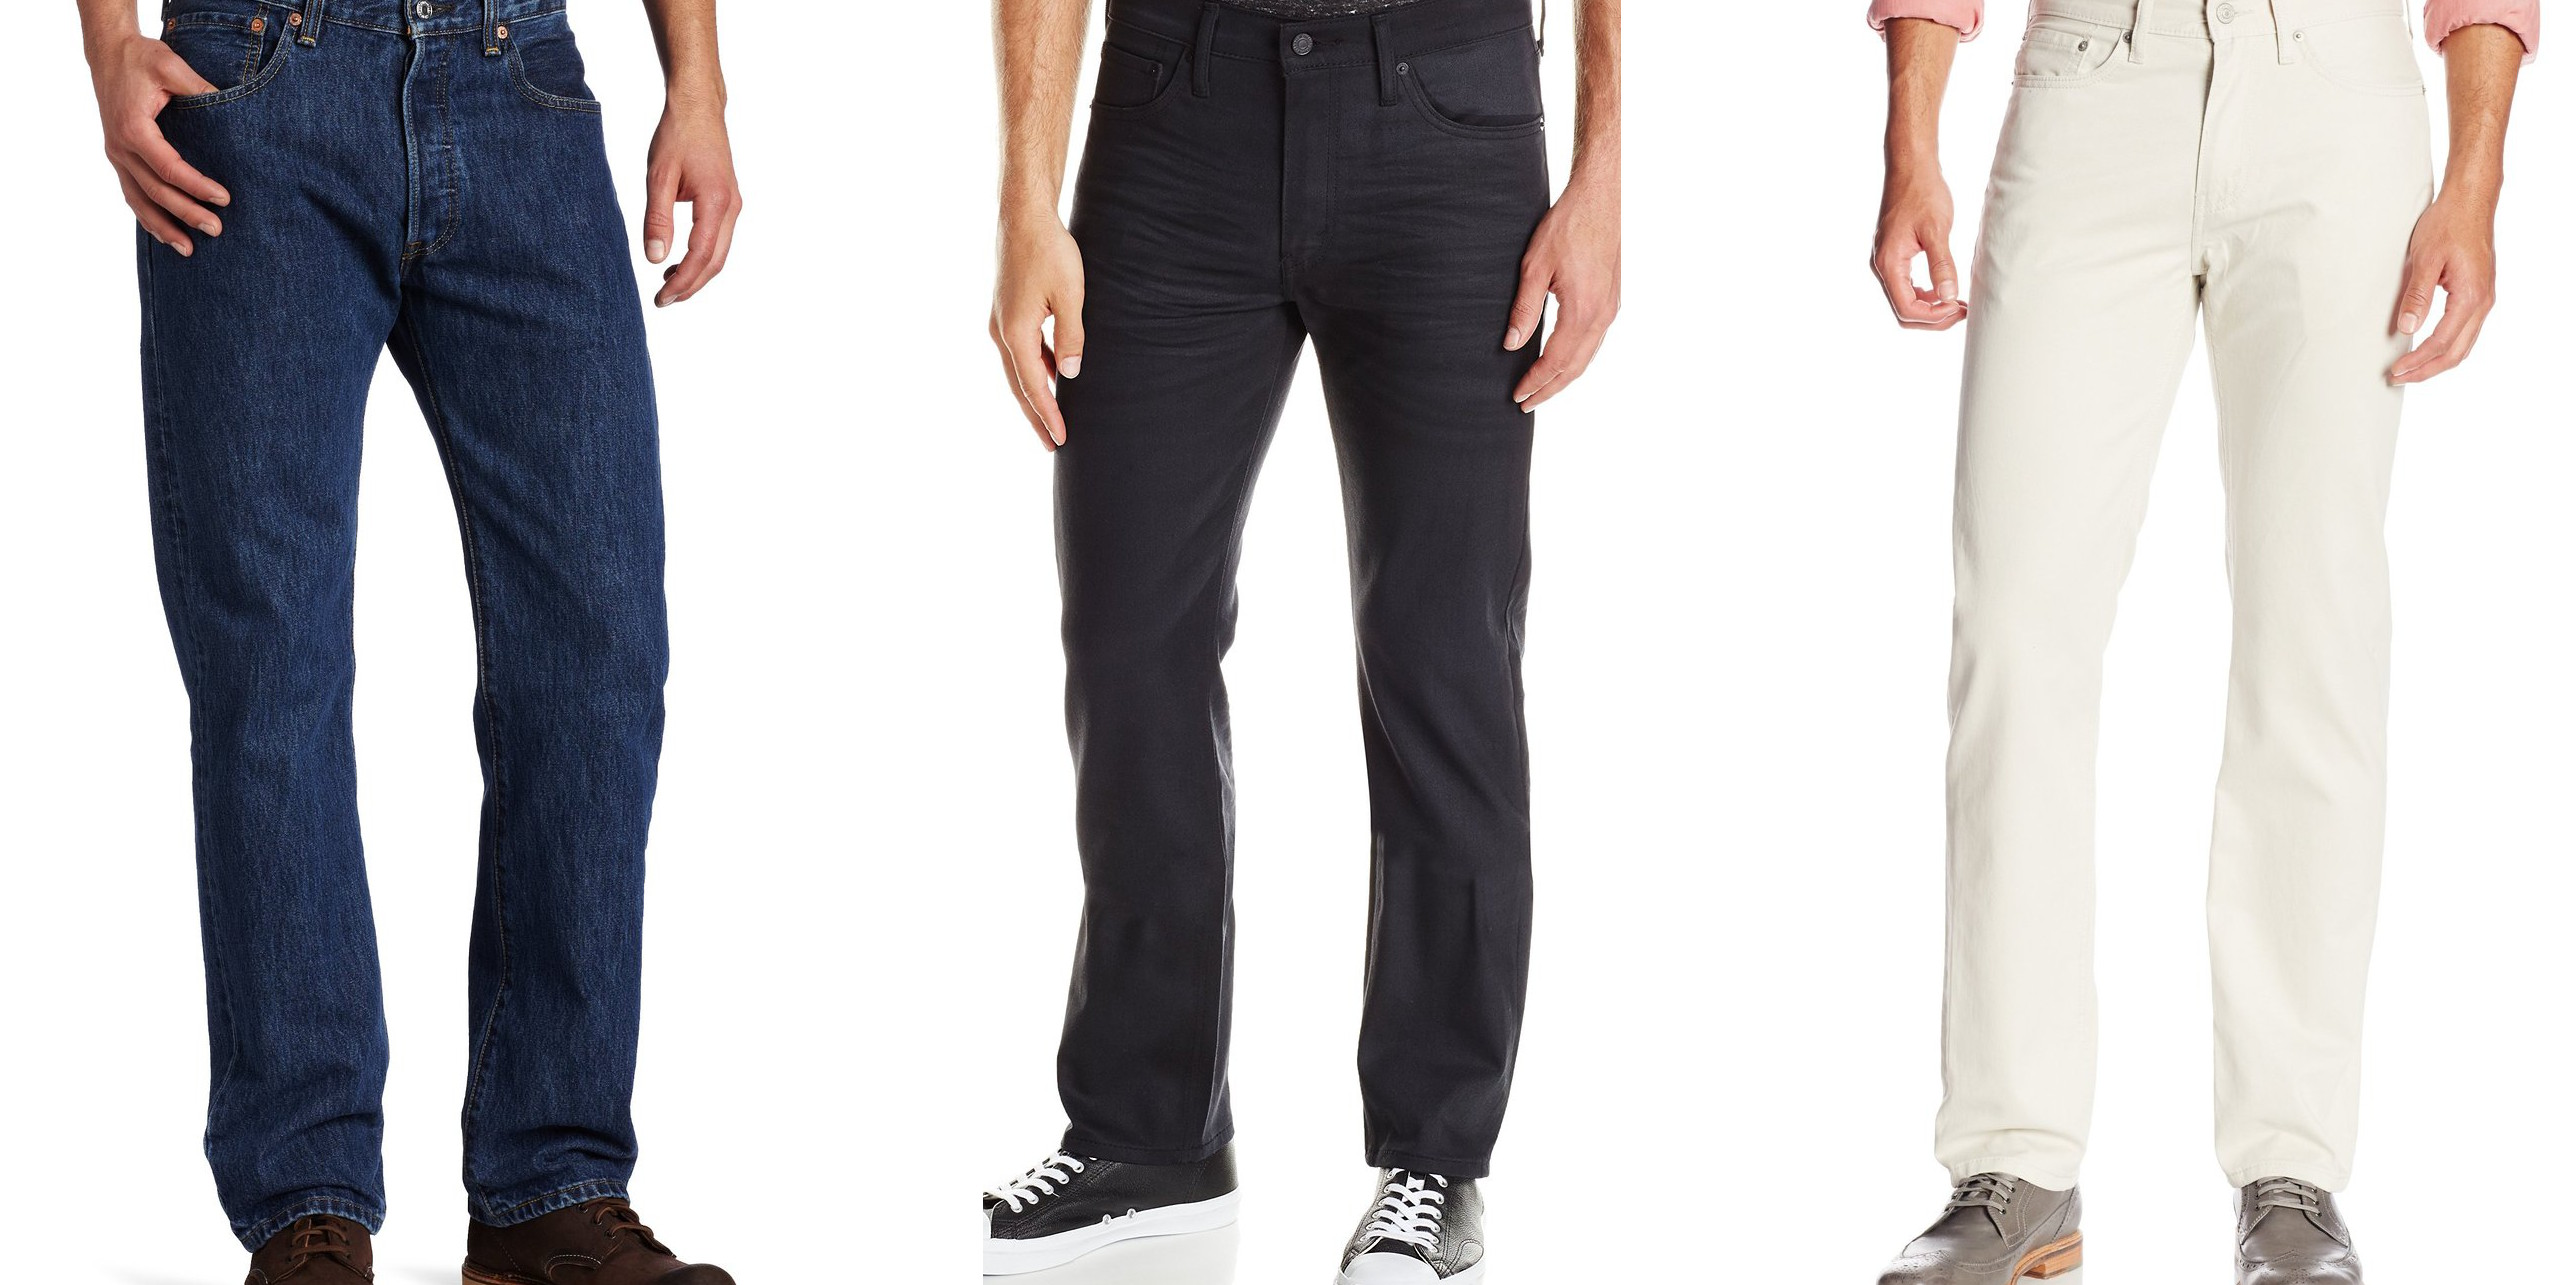 Amazon slashes prices on Levi's jeans for Men, Women and Boys, starting